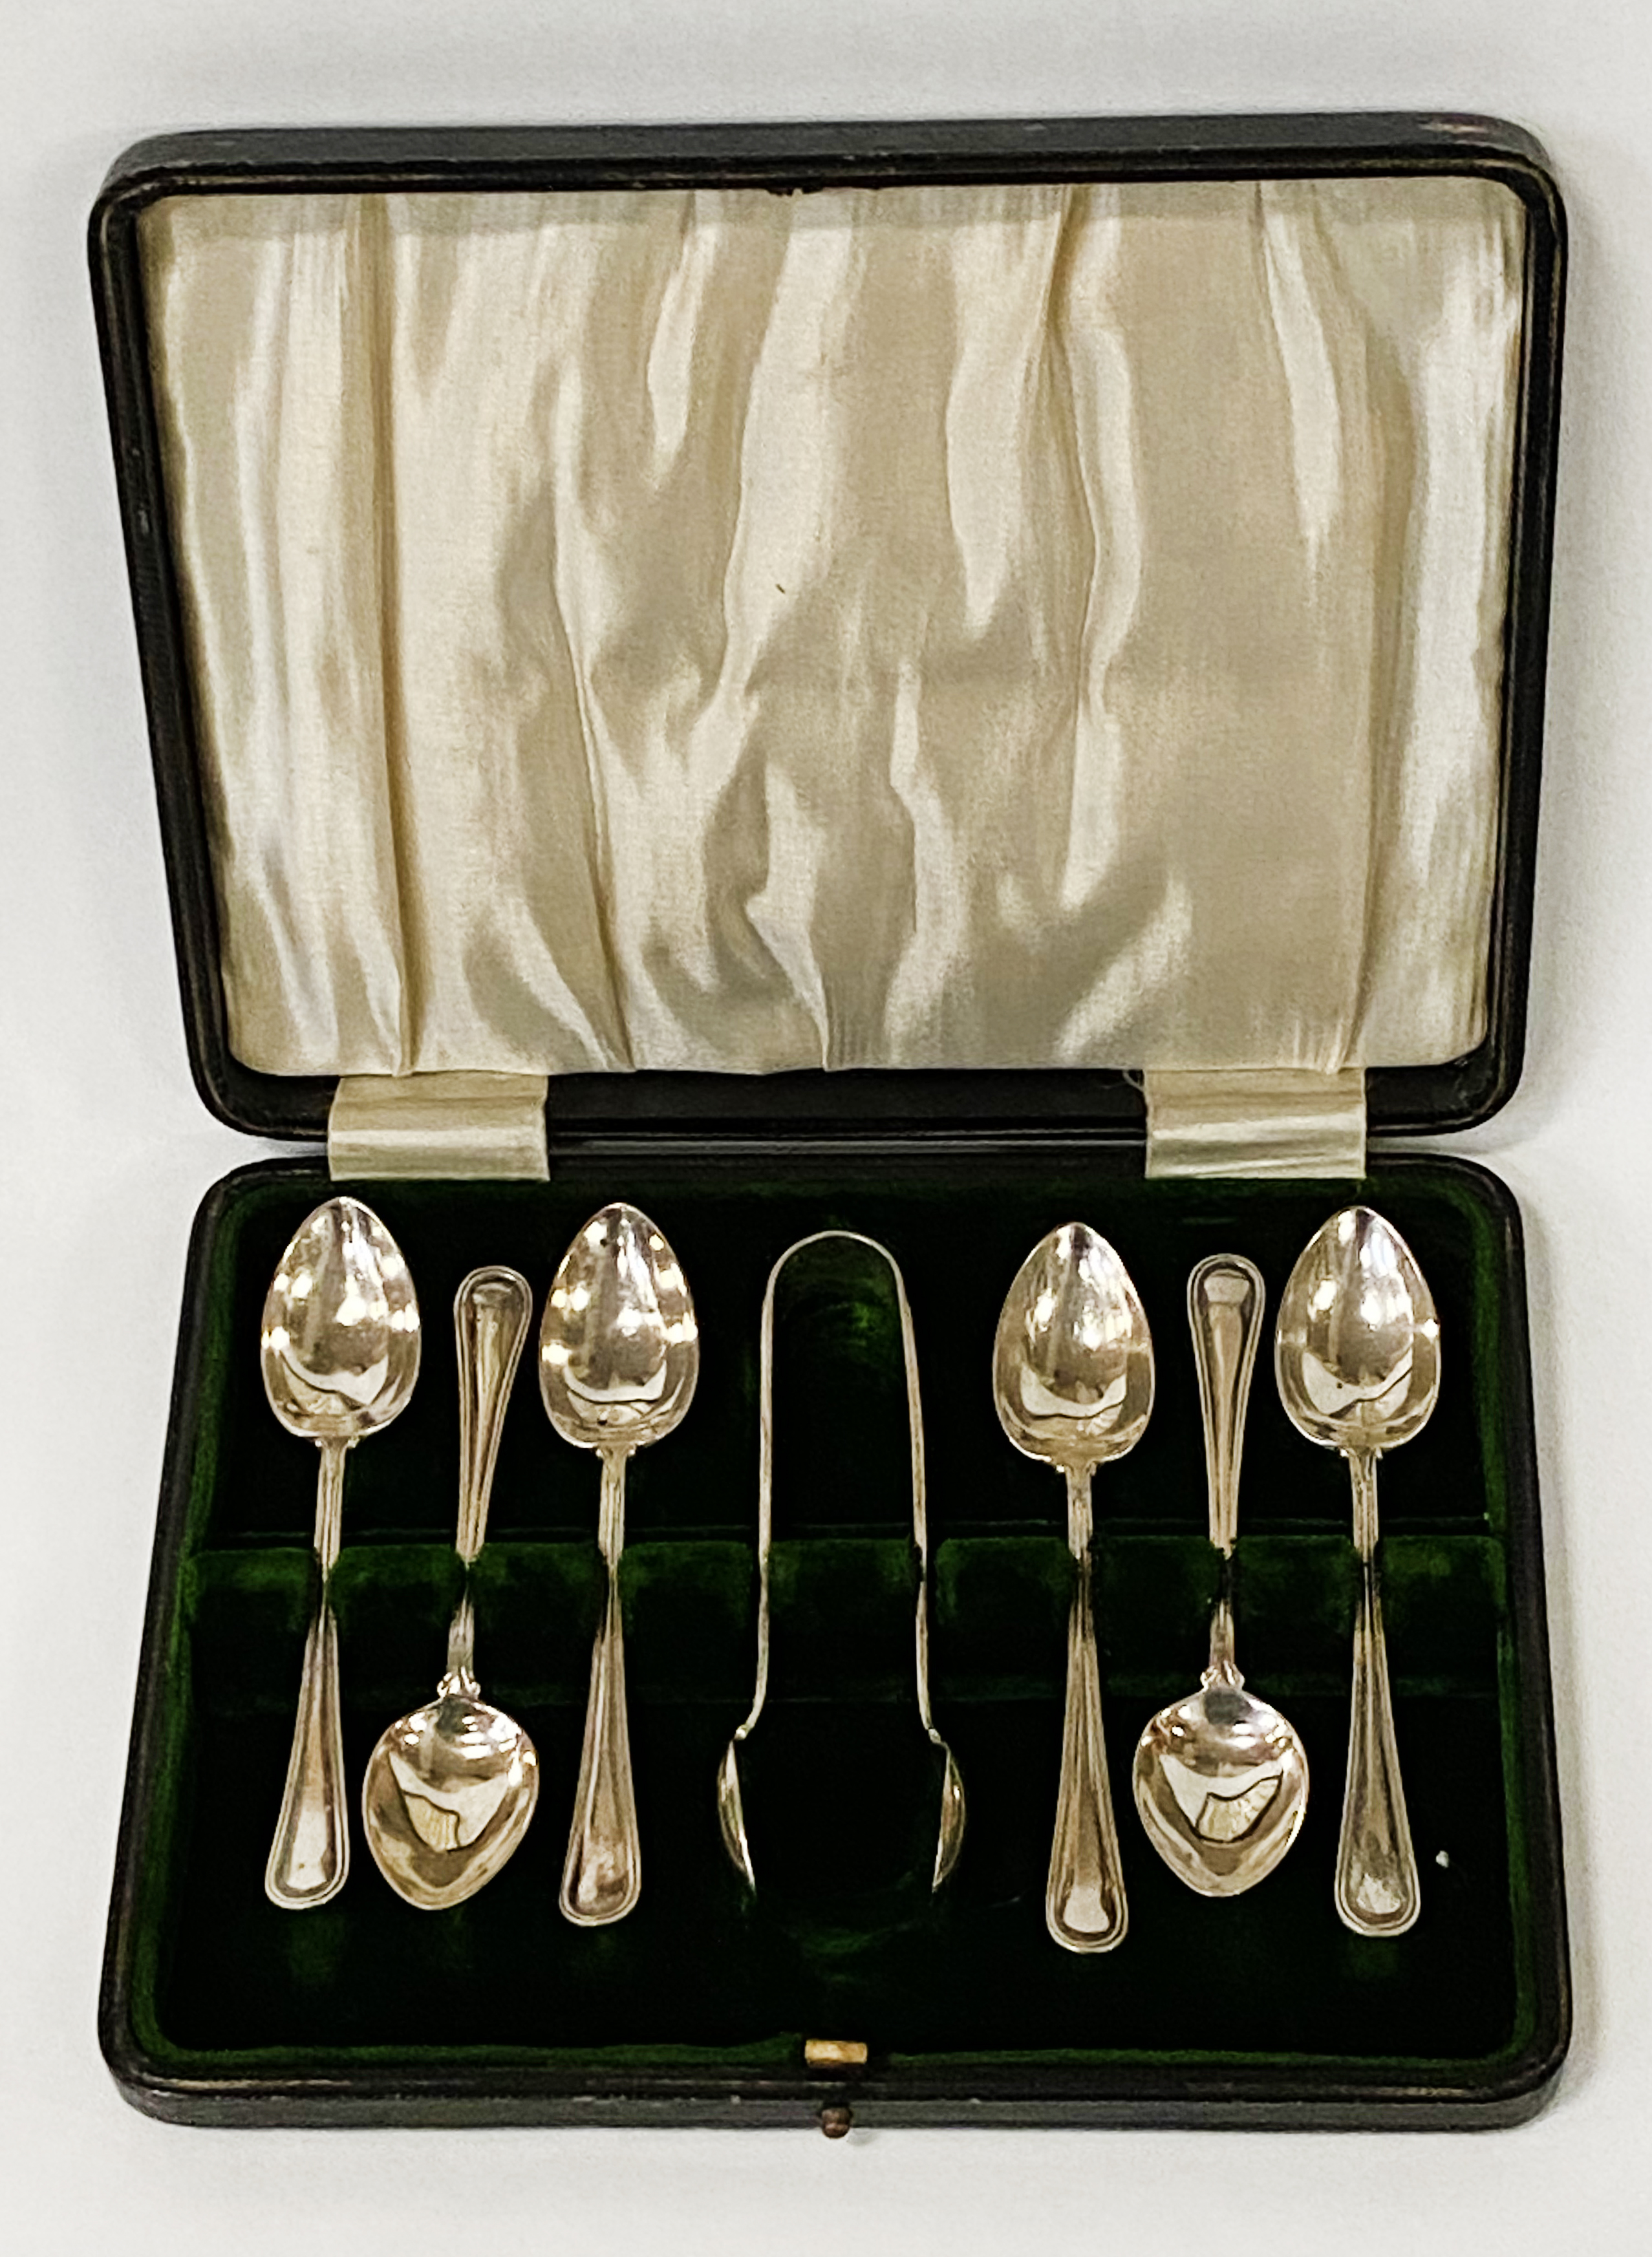 CASED SET OF HM SILVER SPOONS & TONGS - 106 GRAMS